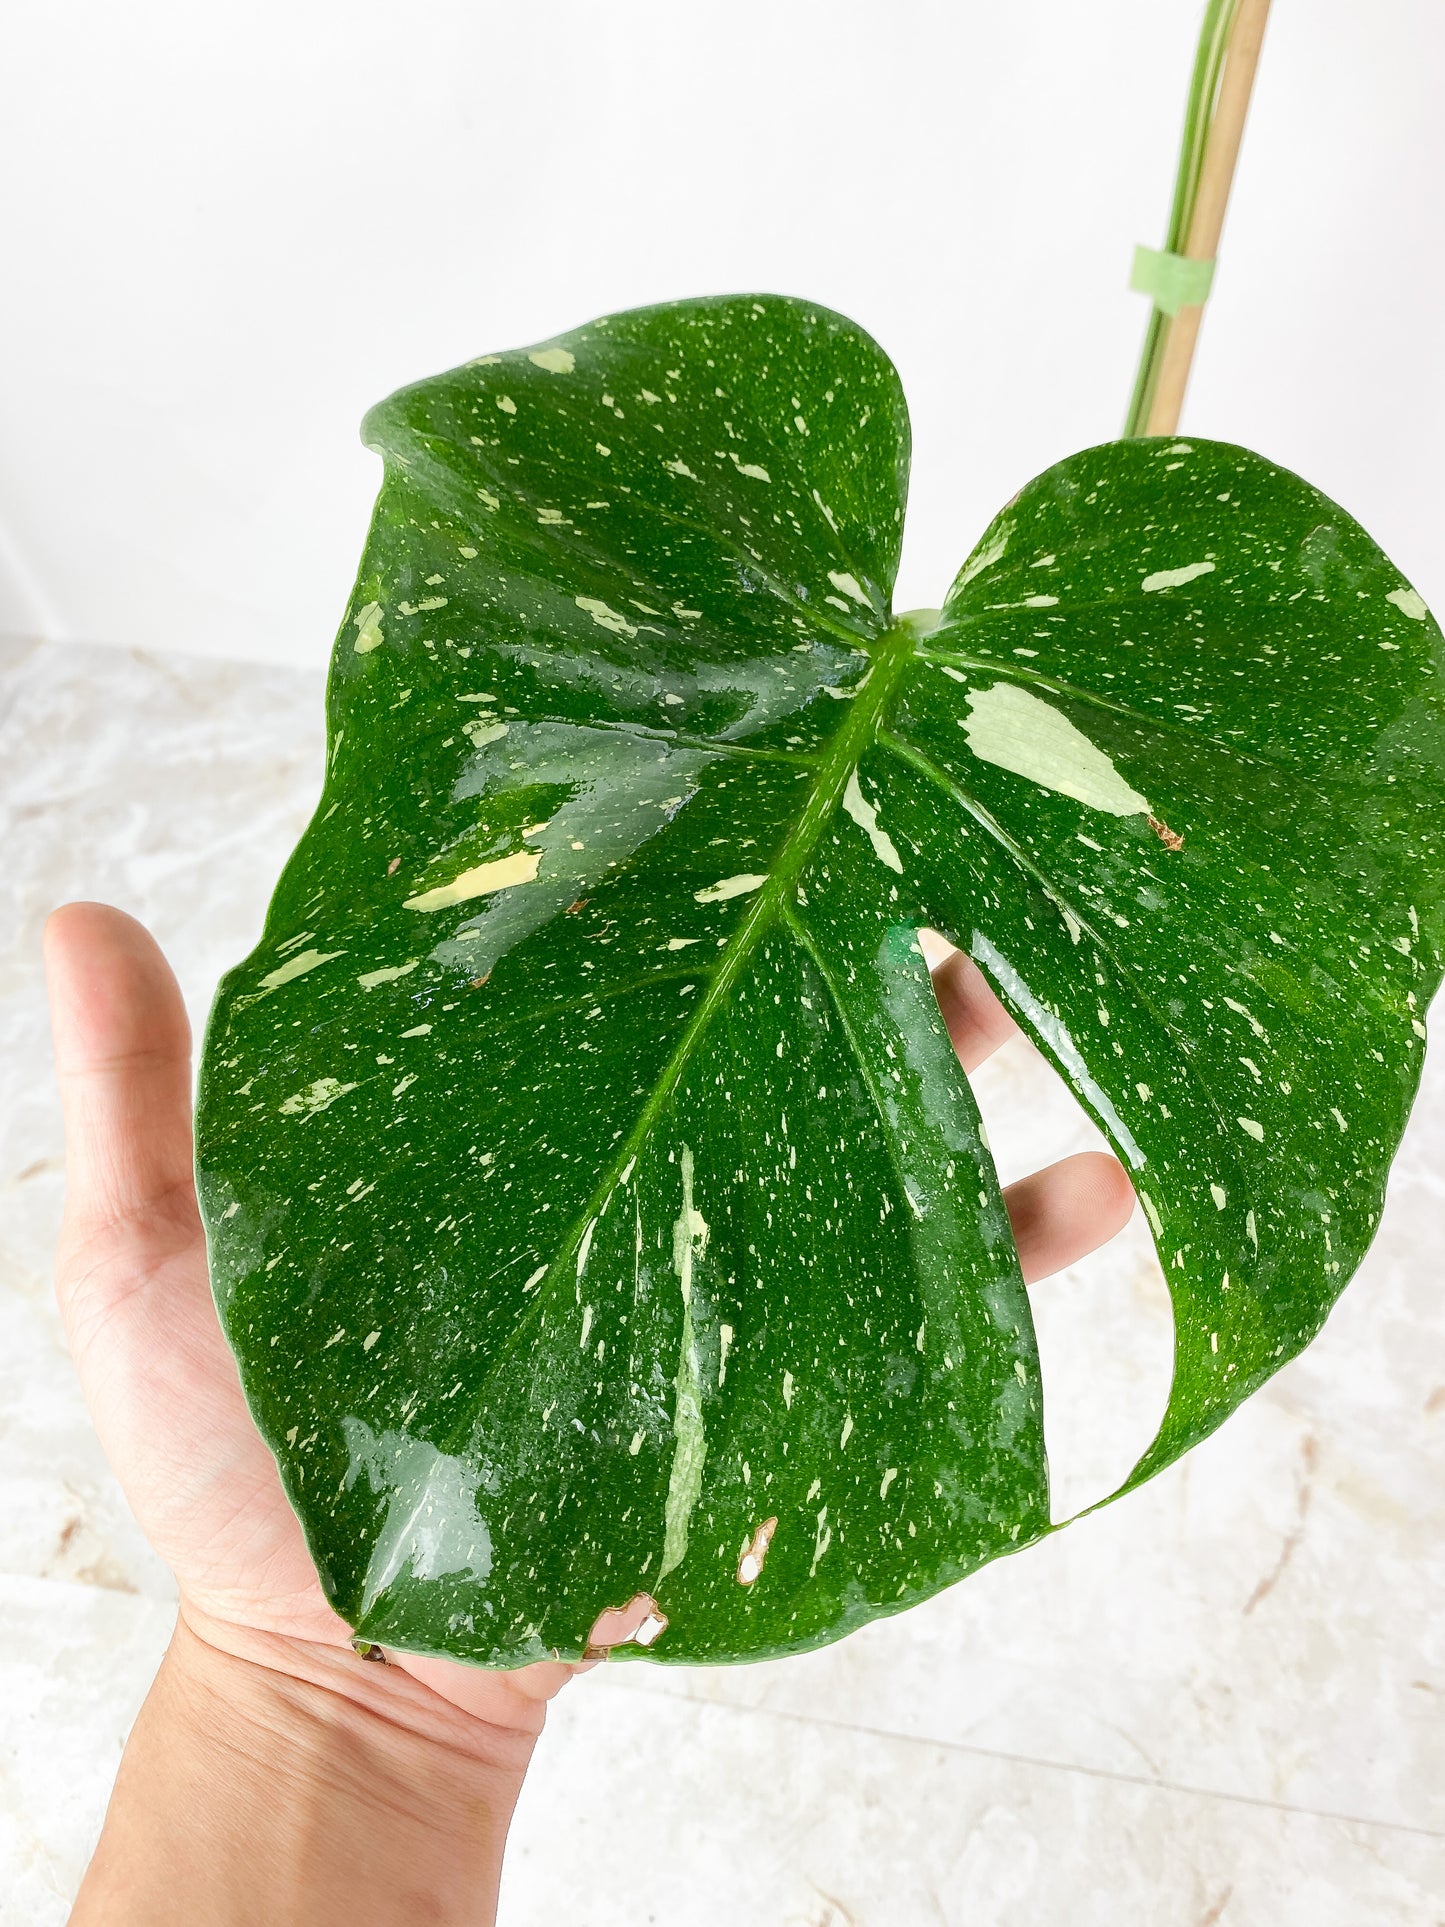 Monstera Thai Constellation Rooted 2 big leaves. Highly Variegated